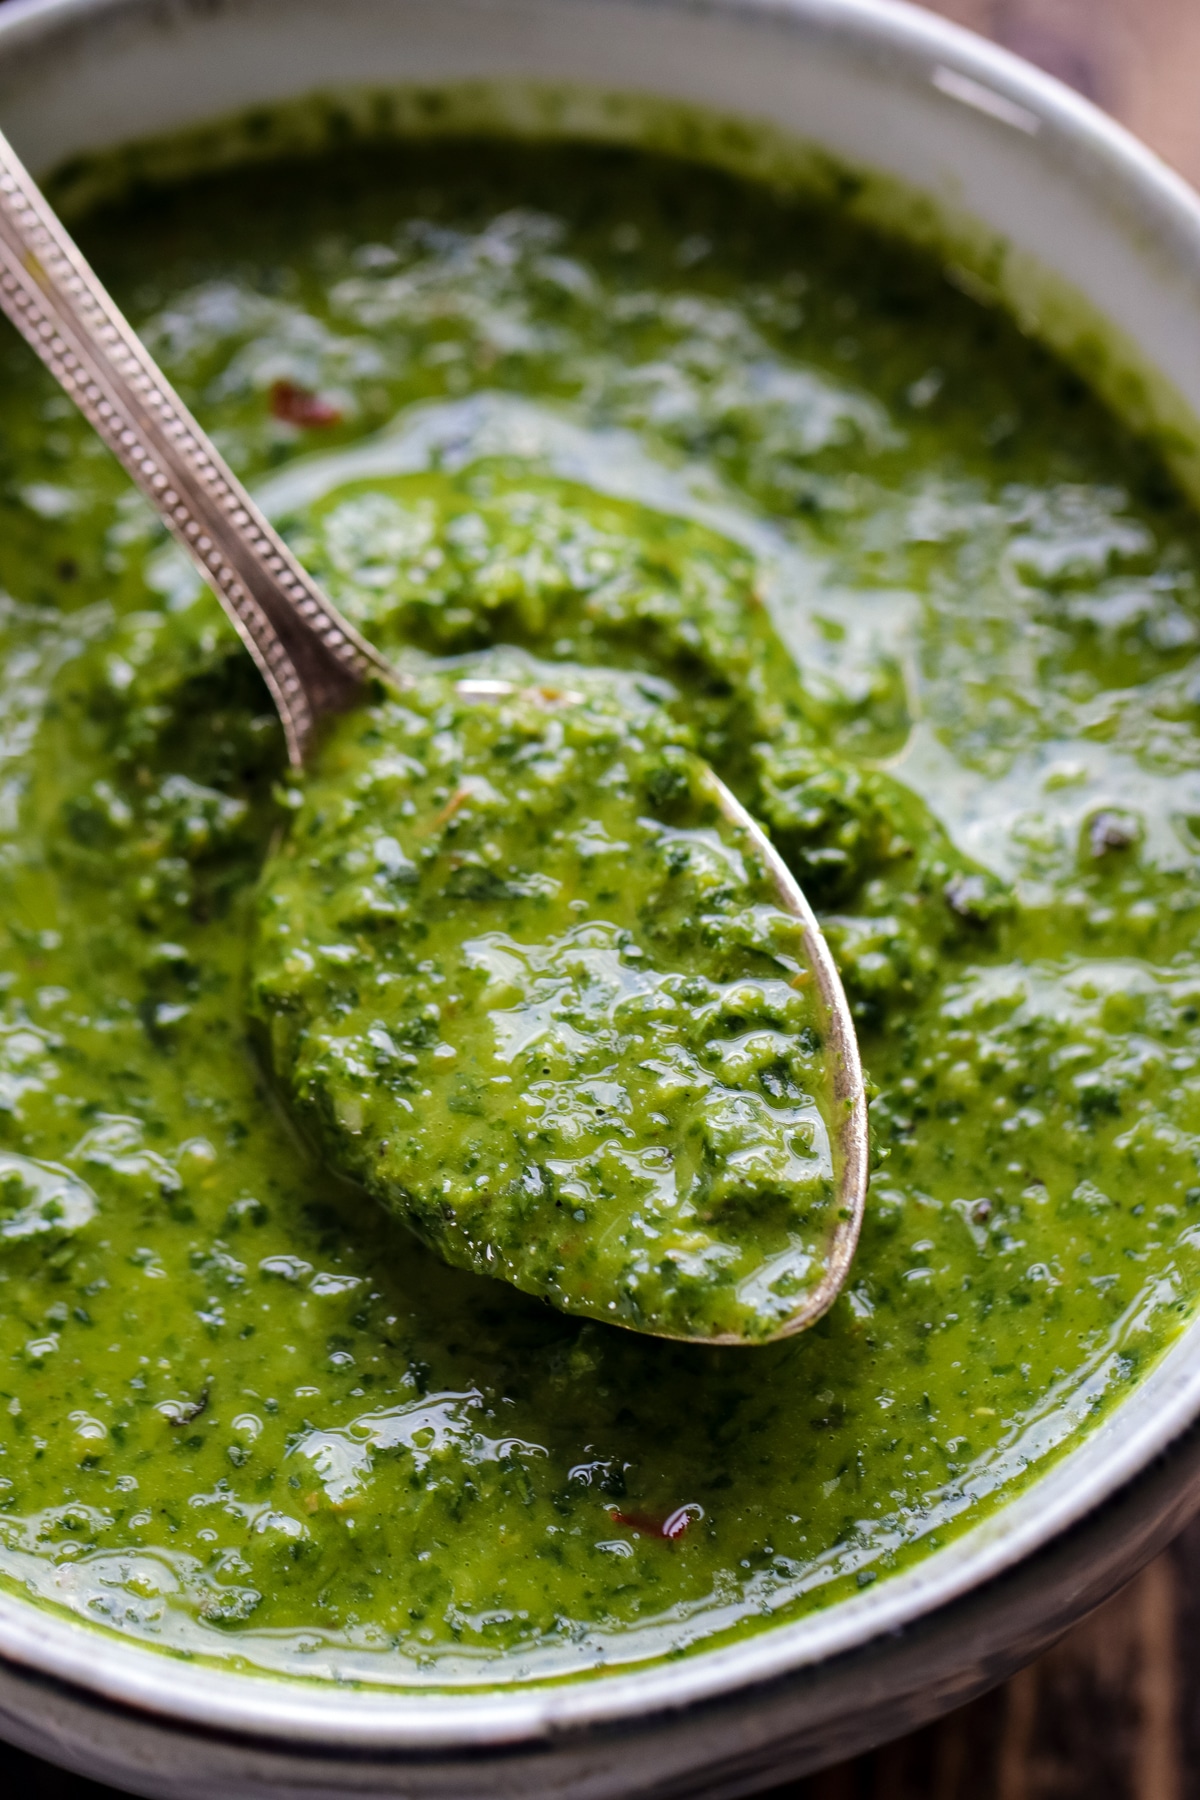 Green harissa in a bowl with a spoon closeup